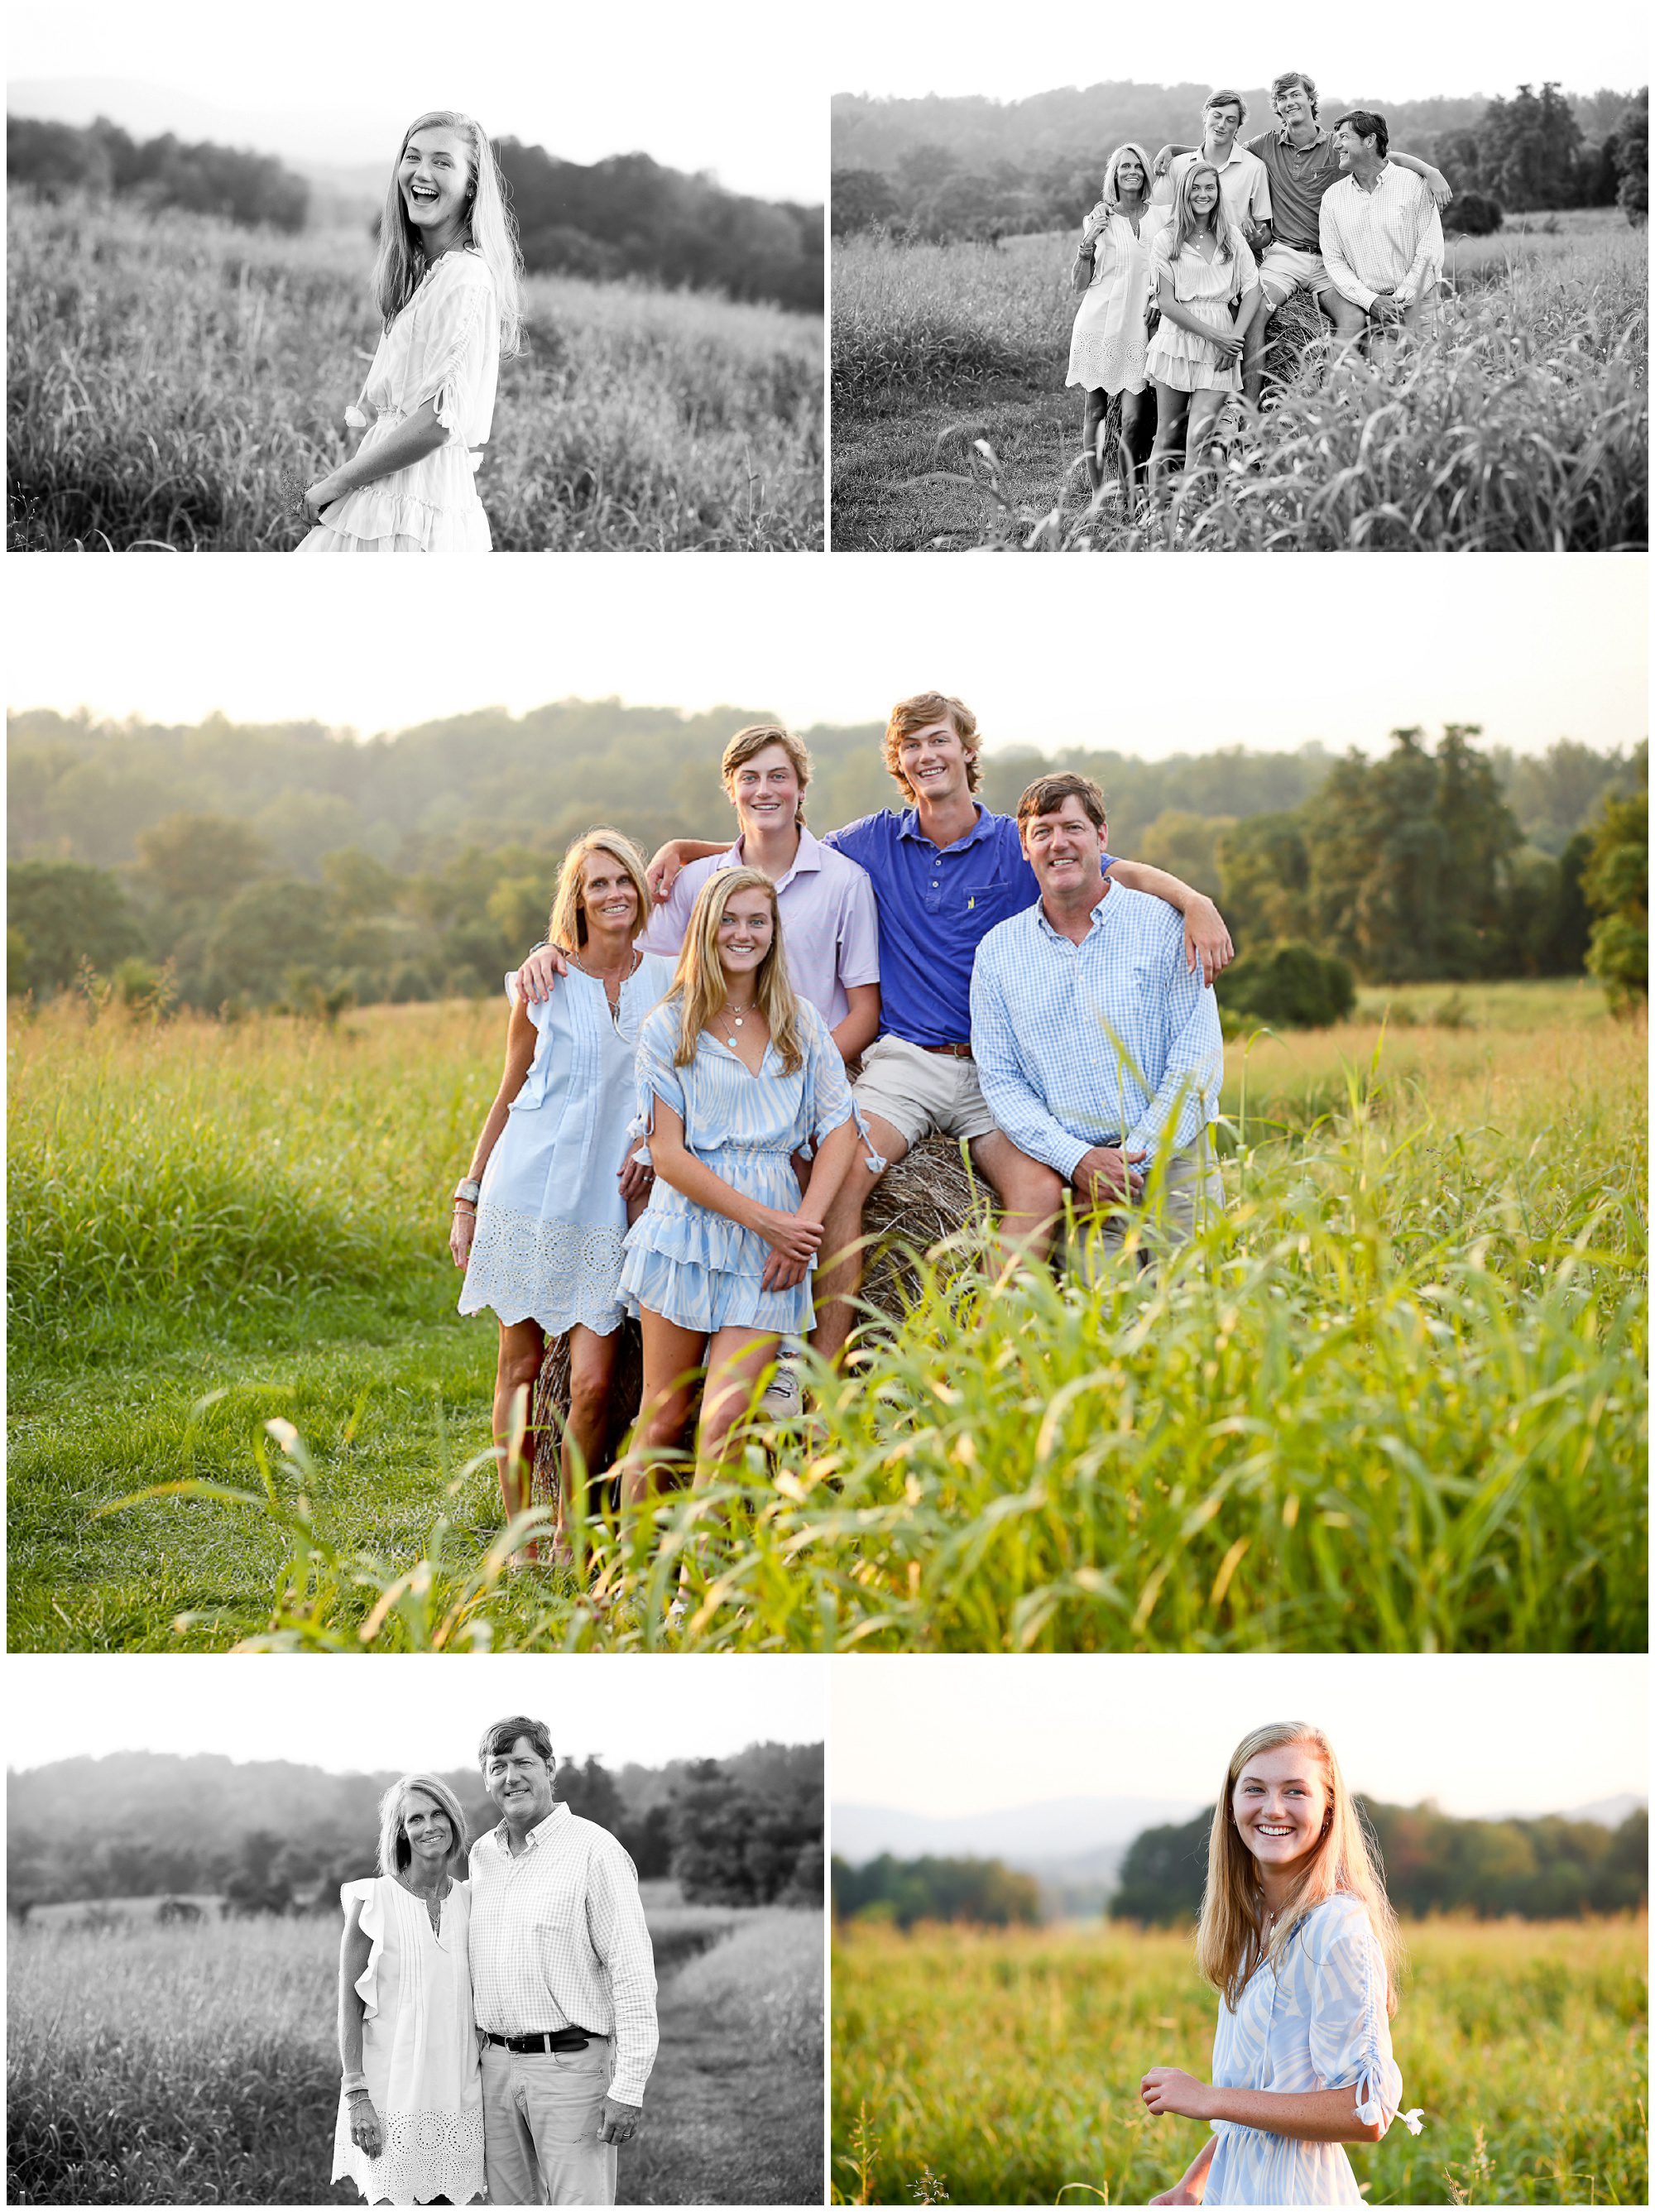 Charlottesville Family Summer Portraits in Albemarle County cville photographer photoshoot teens young adult kids pictures session virginia